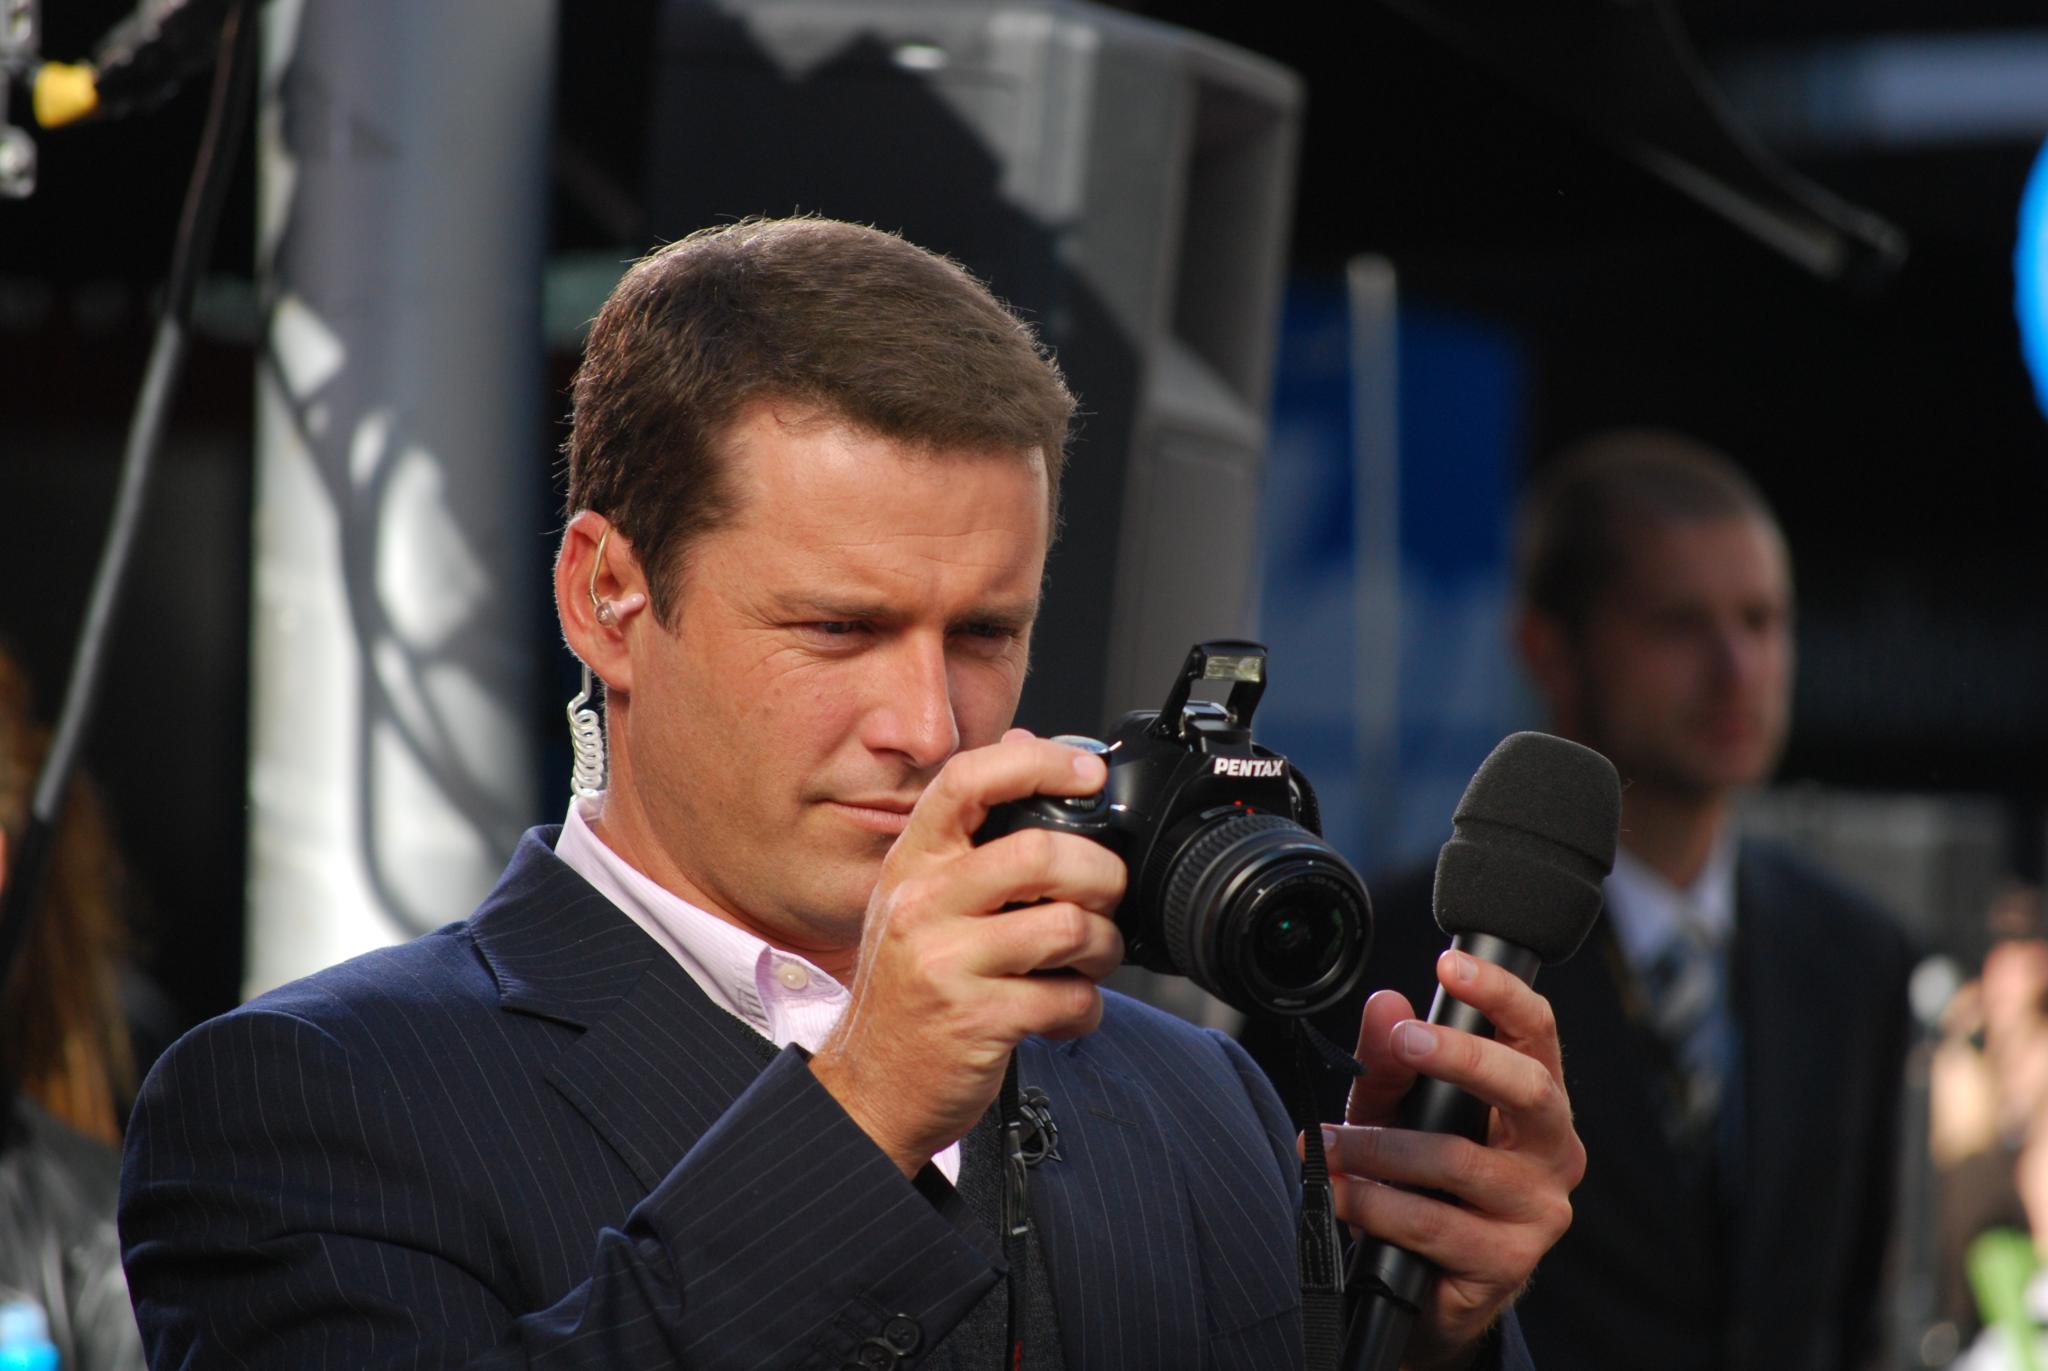 Karl Stefanovic and Pentax camera - Ch9 Today Show, Bourke Street Mall - Flickr - avlxyz